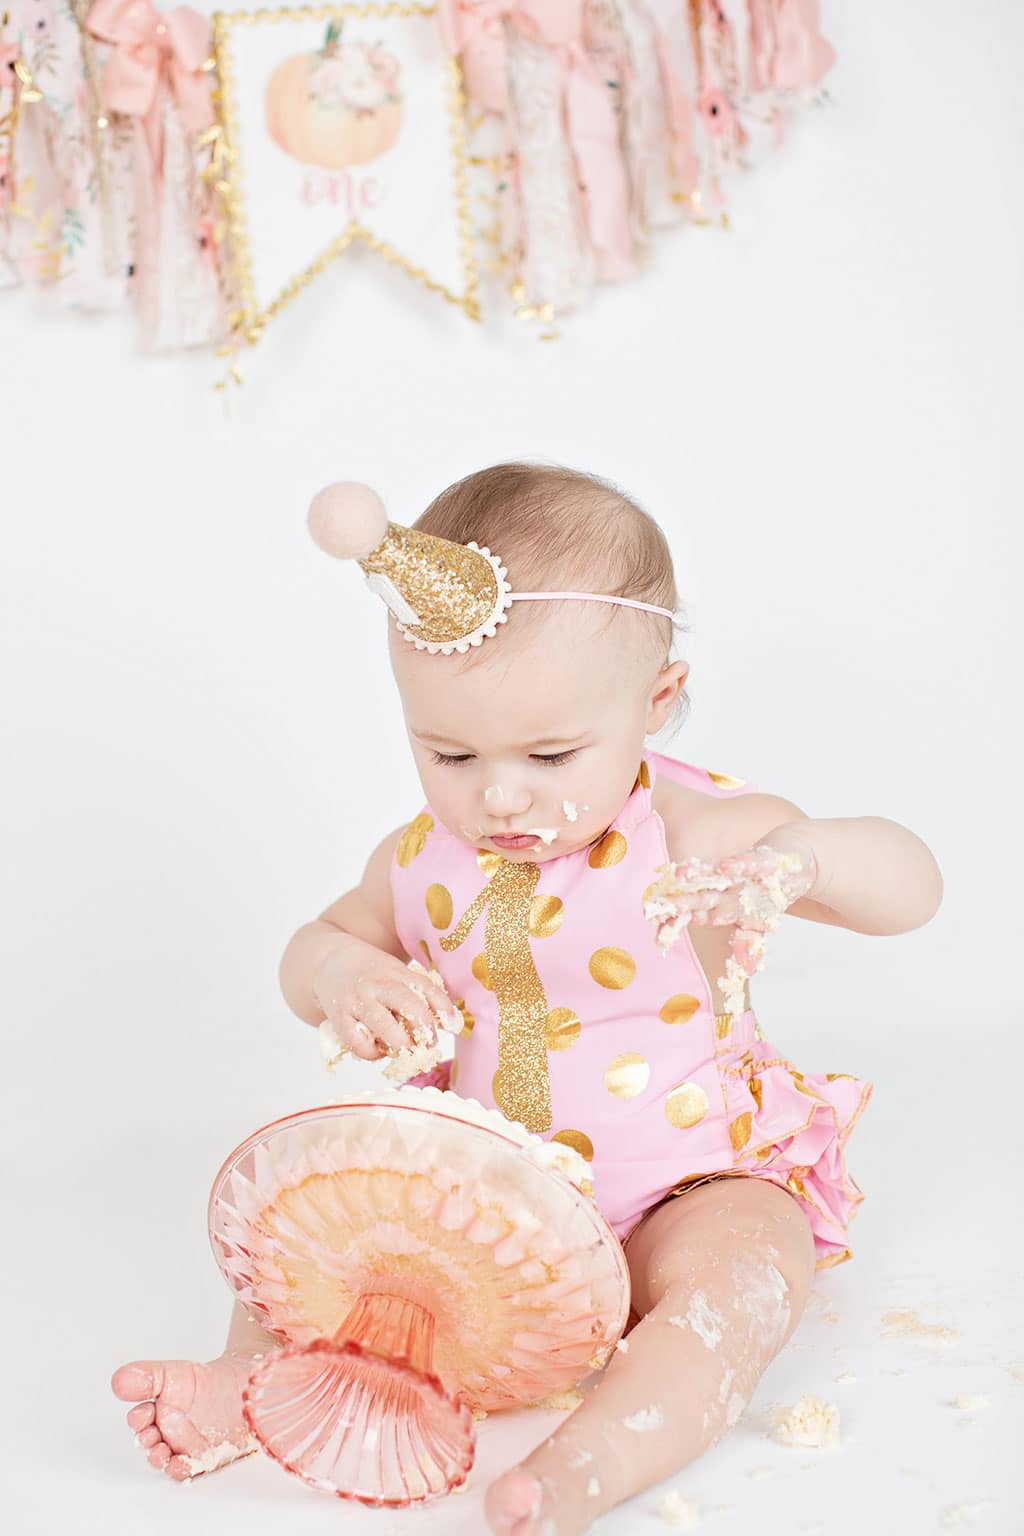 a very personalized first birthday session to capture baby's first milestone